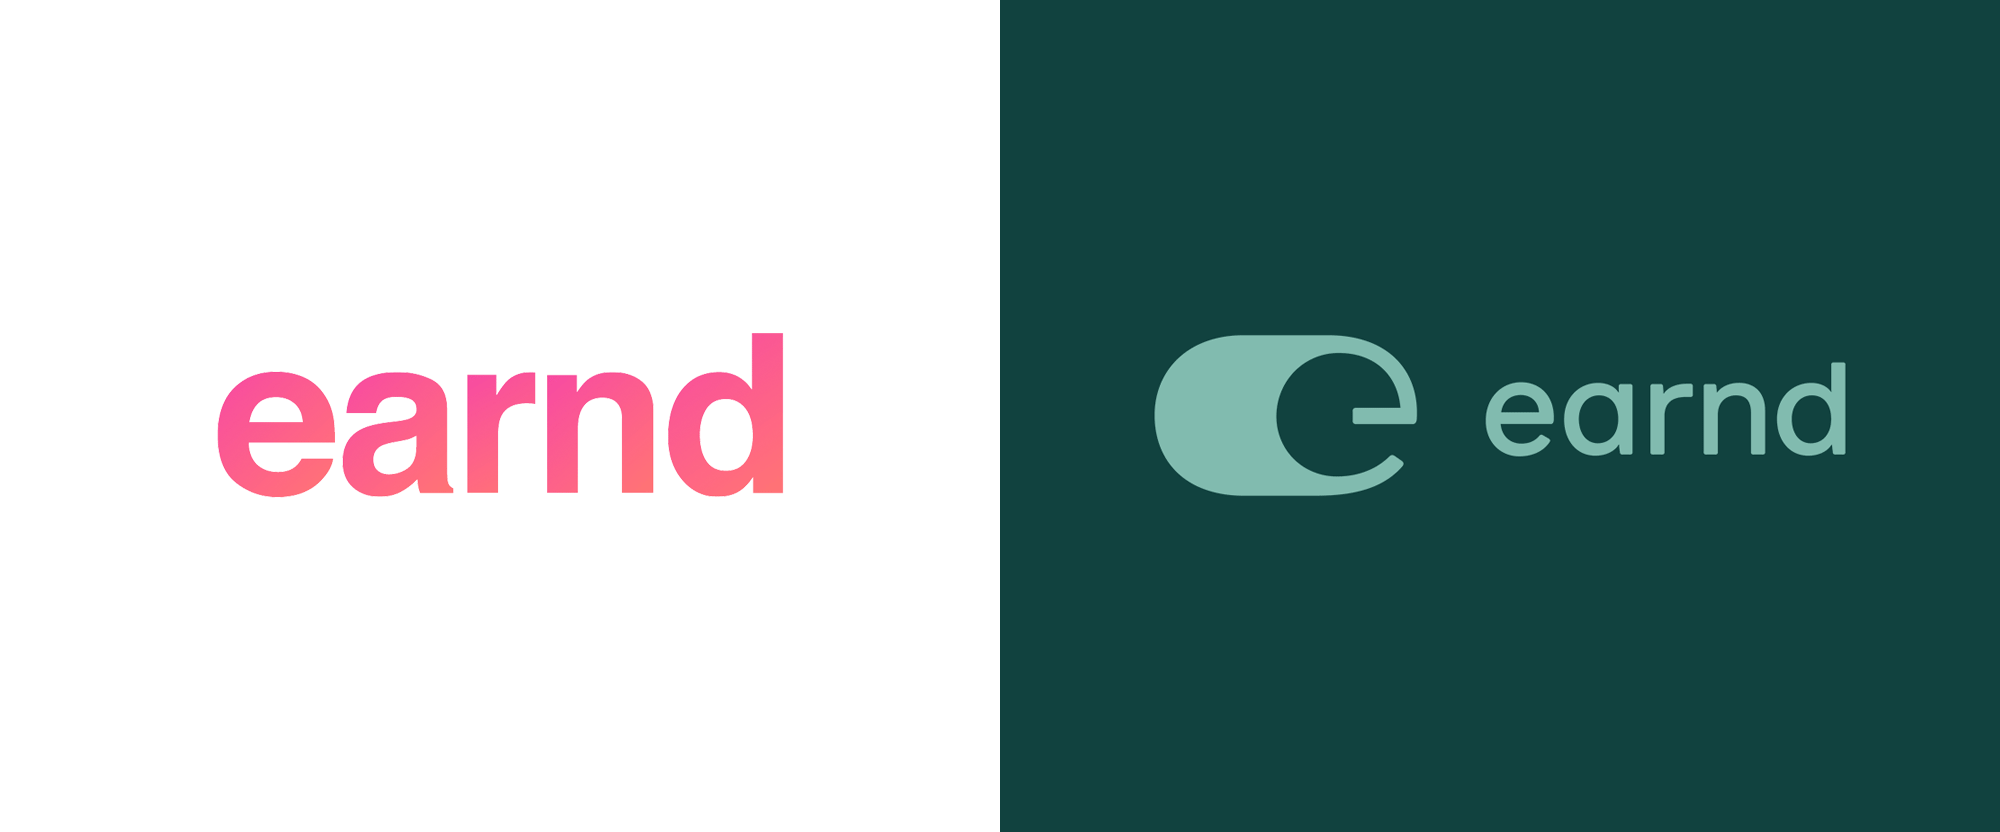 New Logo and Identity for Earnd by venturethree